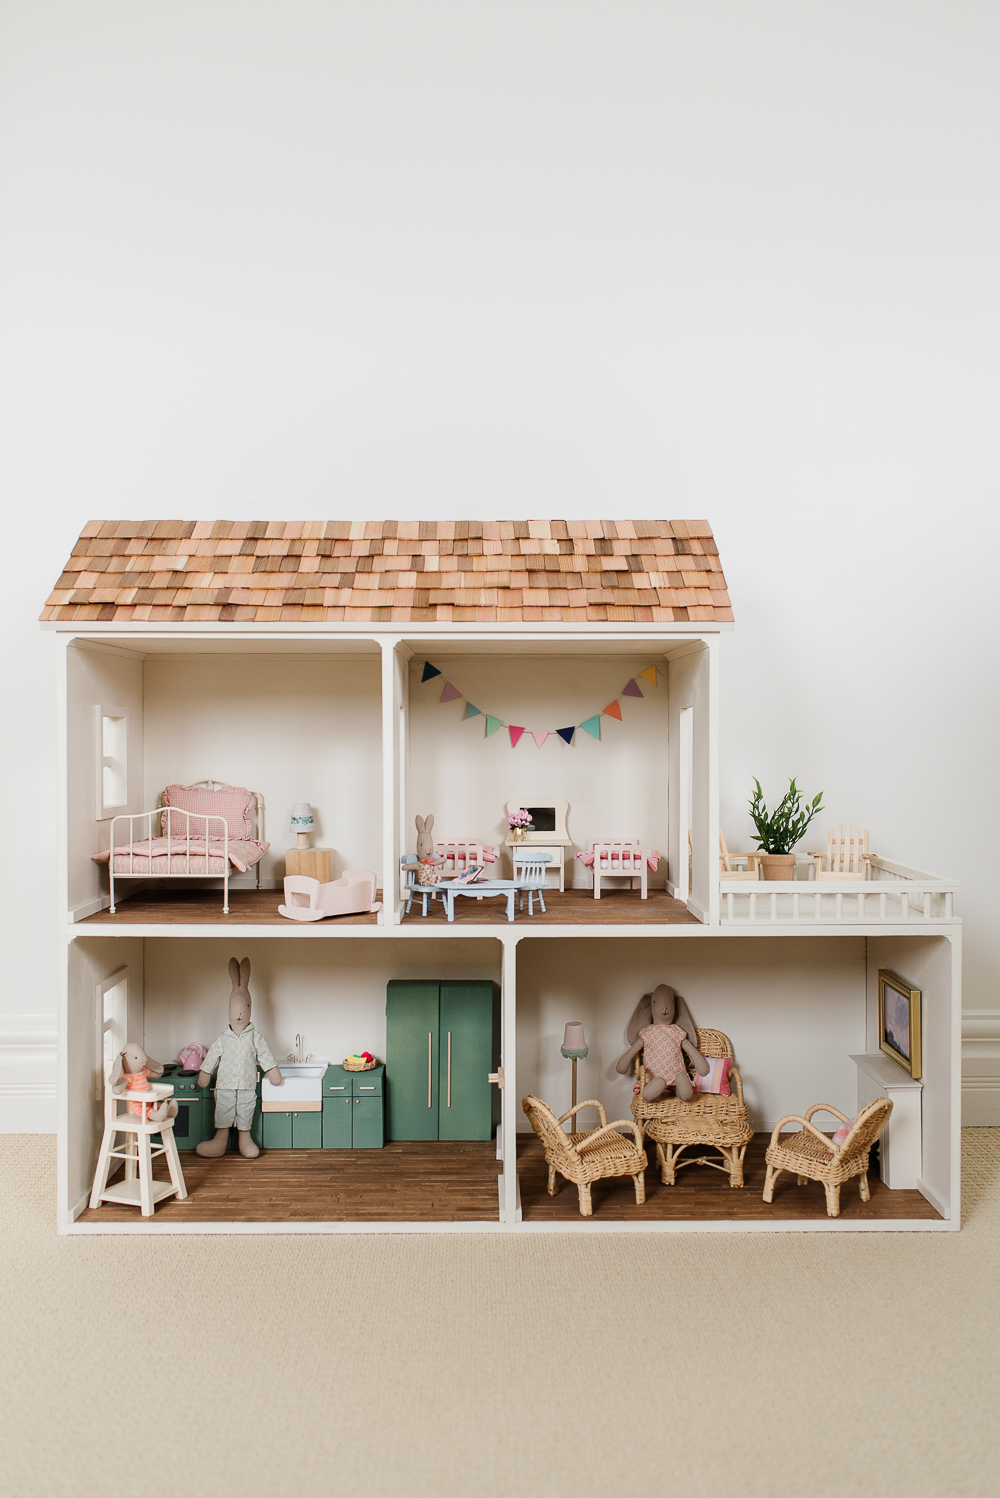 Build Your Own Wooden Dollhouse - Nick + Alicia